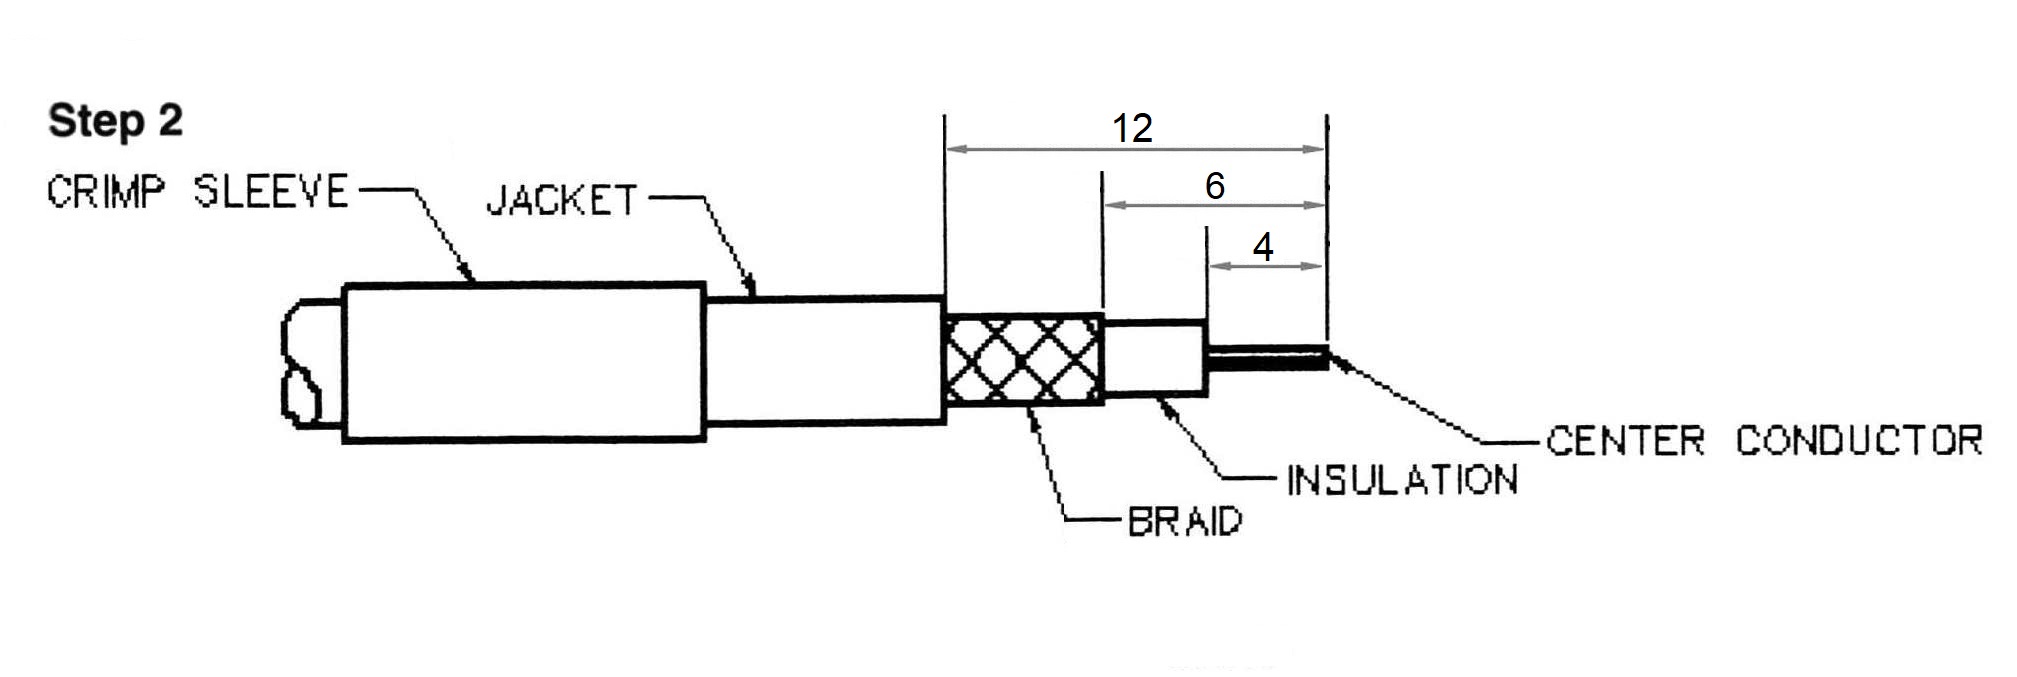 BNC female Crimp On for RG-8, RG-11, RG-83, RG-213, RG-393, LMR-400, and other 0.405 Inch OD Coax 7006-BNC-400 Installation Guide step 2 - Max-Gain Systems Inc